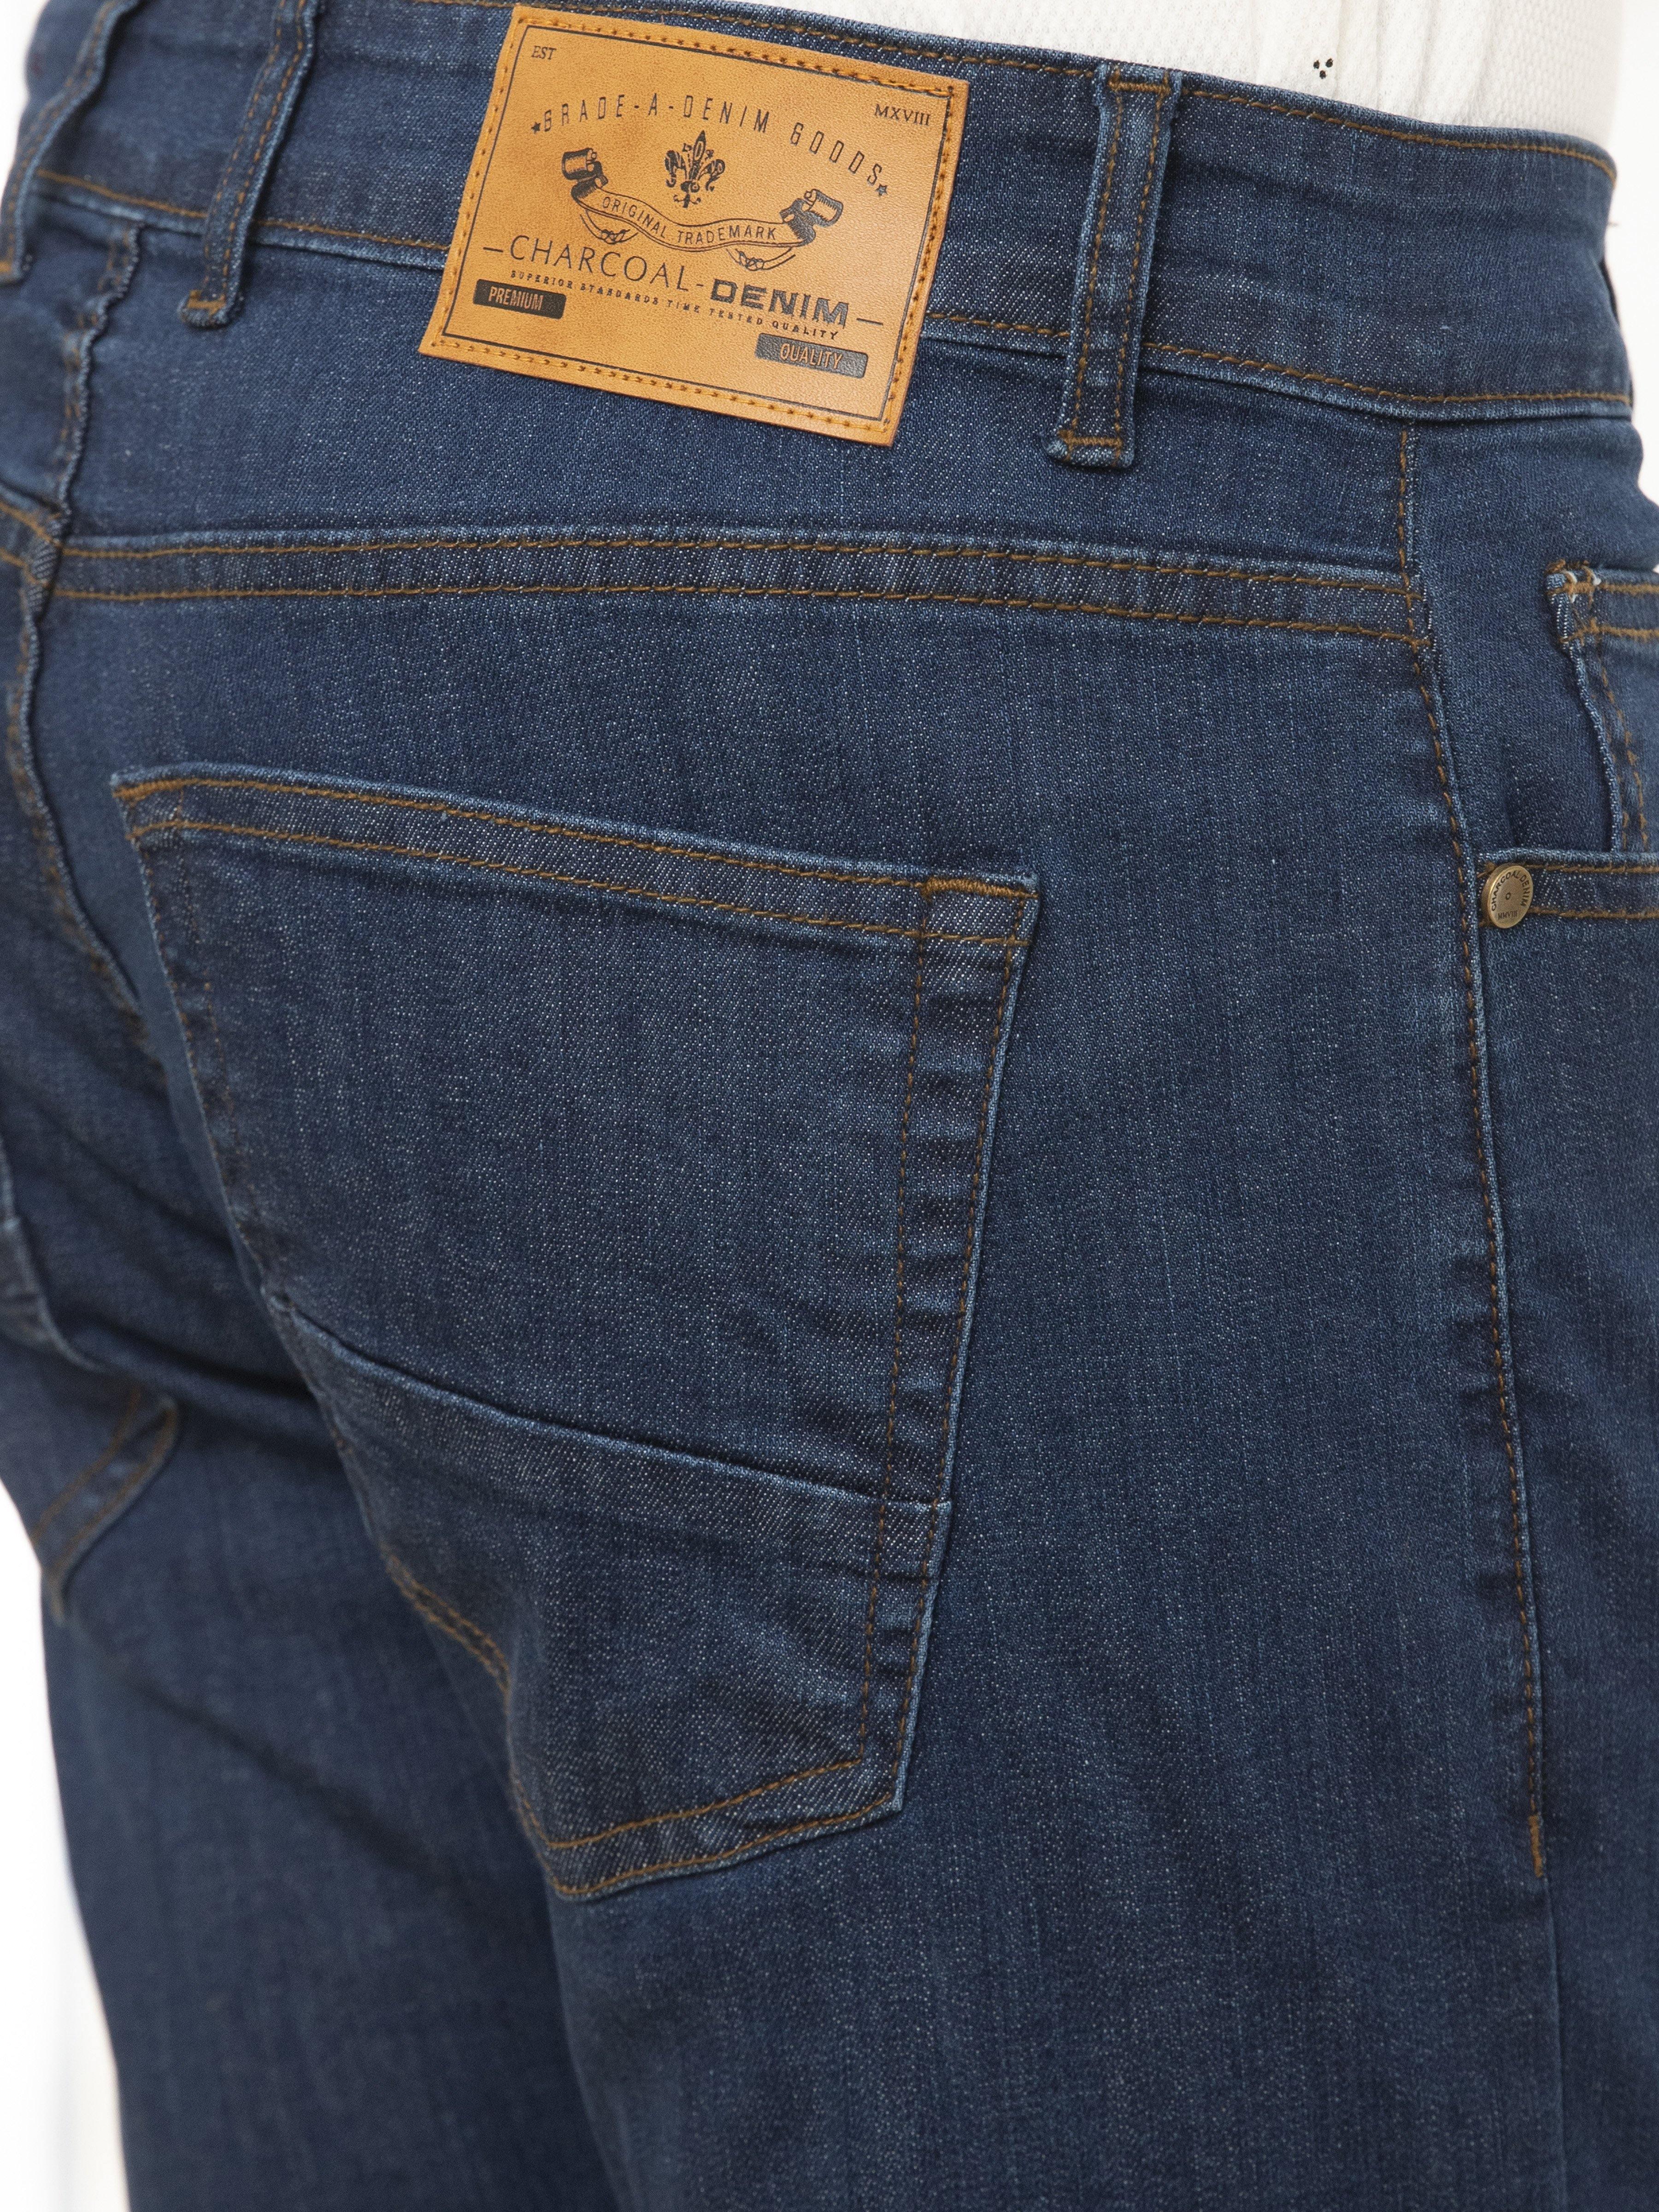 SLIM FIT JEANS DARK NAVY at Charcoal Clothing